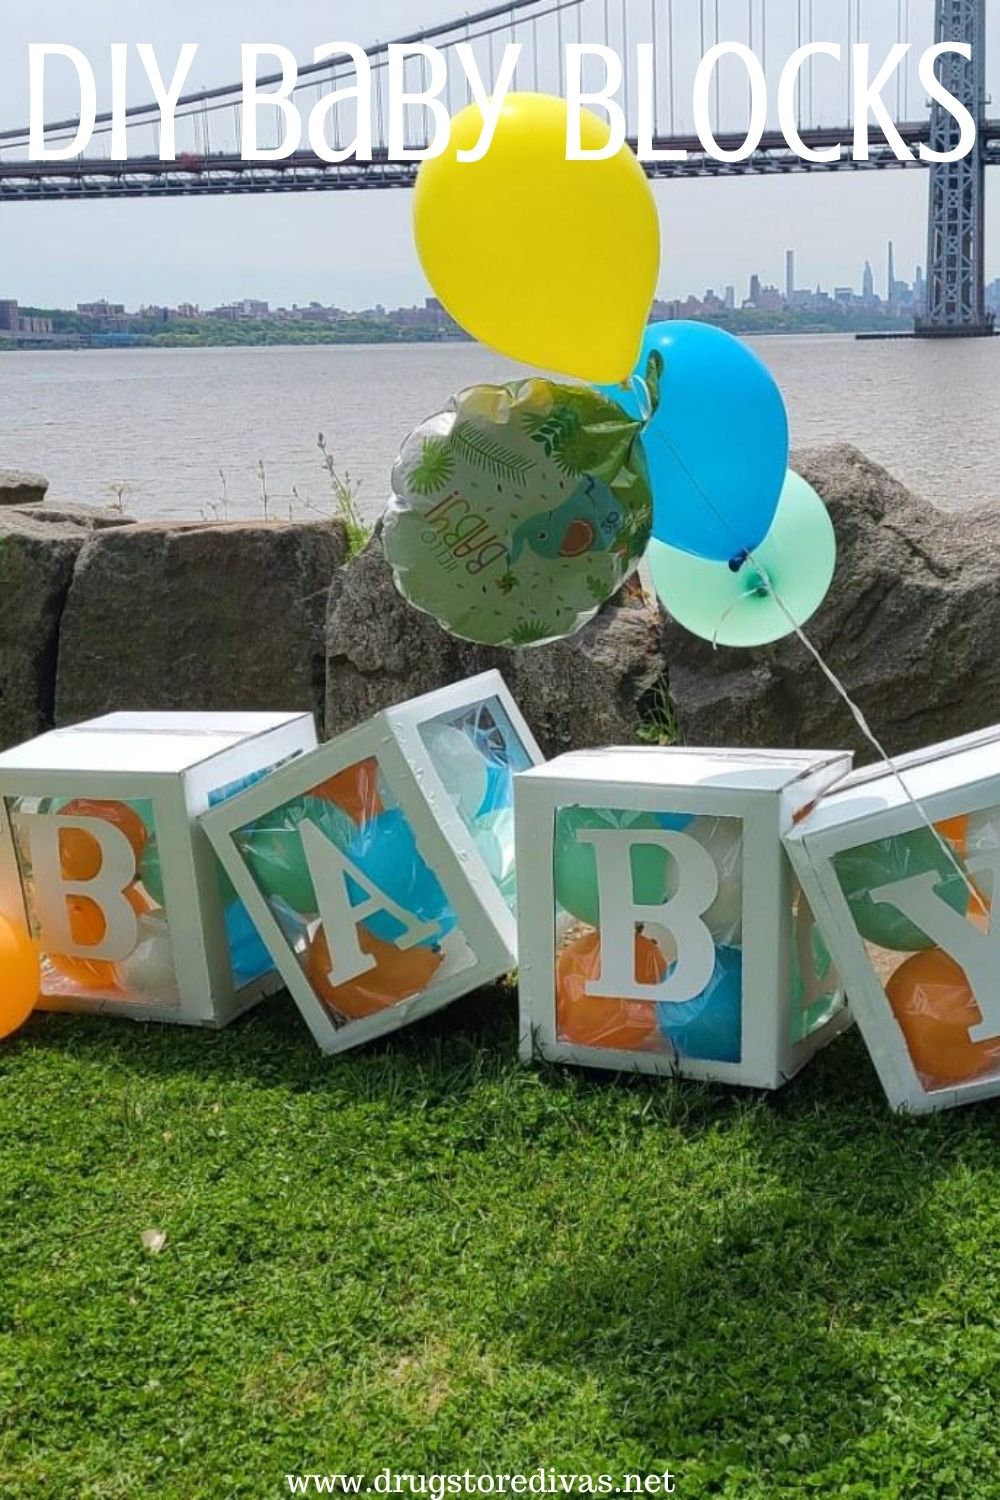 Homemade cardboard Baby Blocks displayed outside with the words 